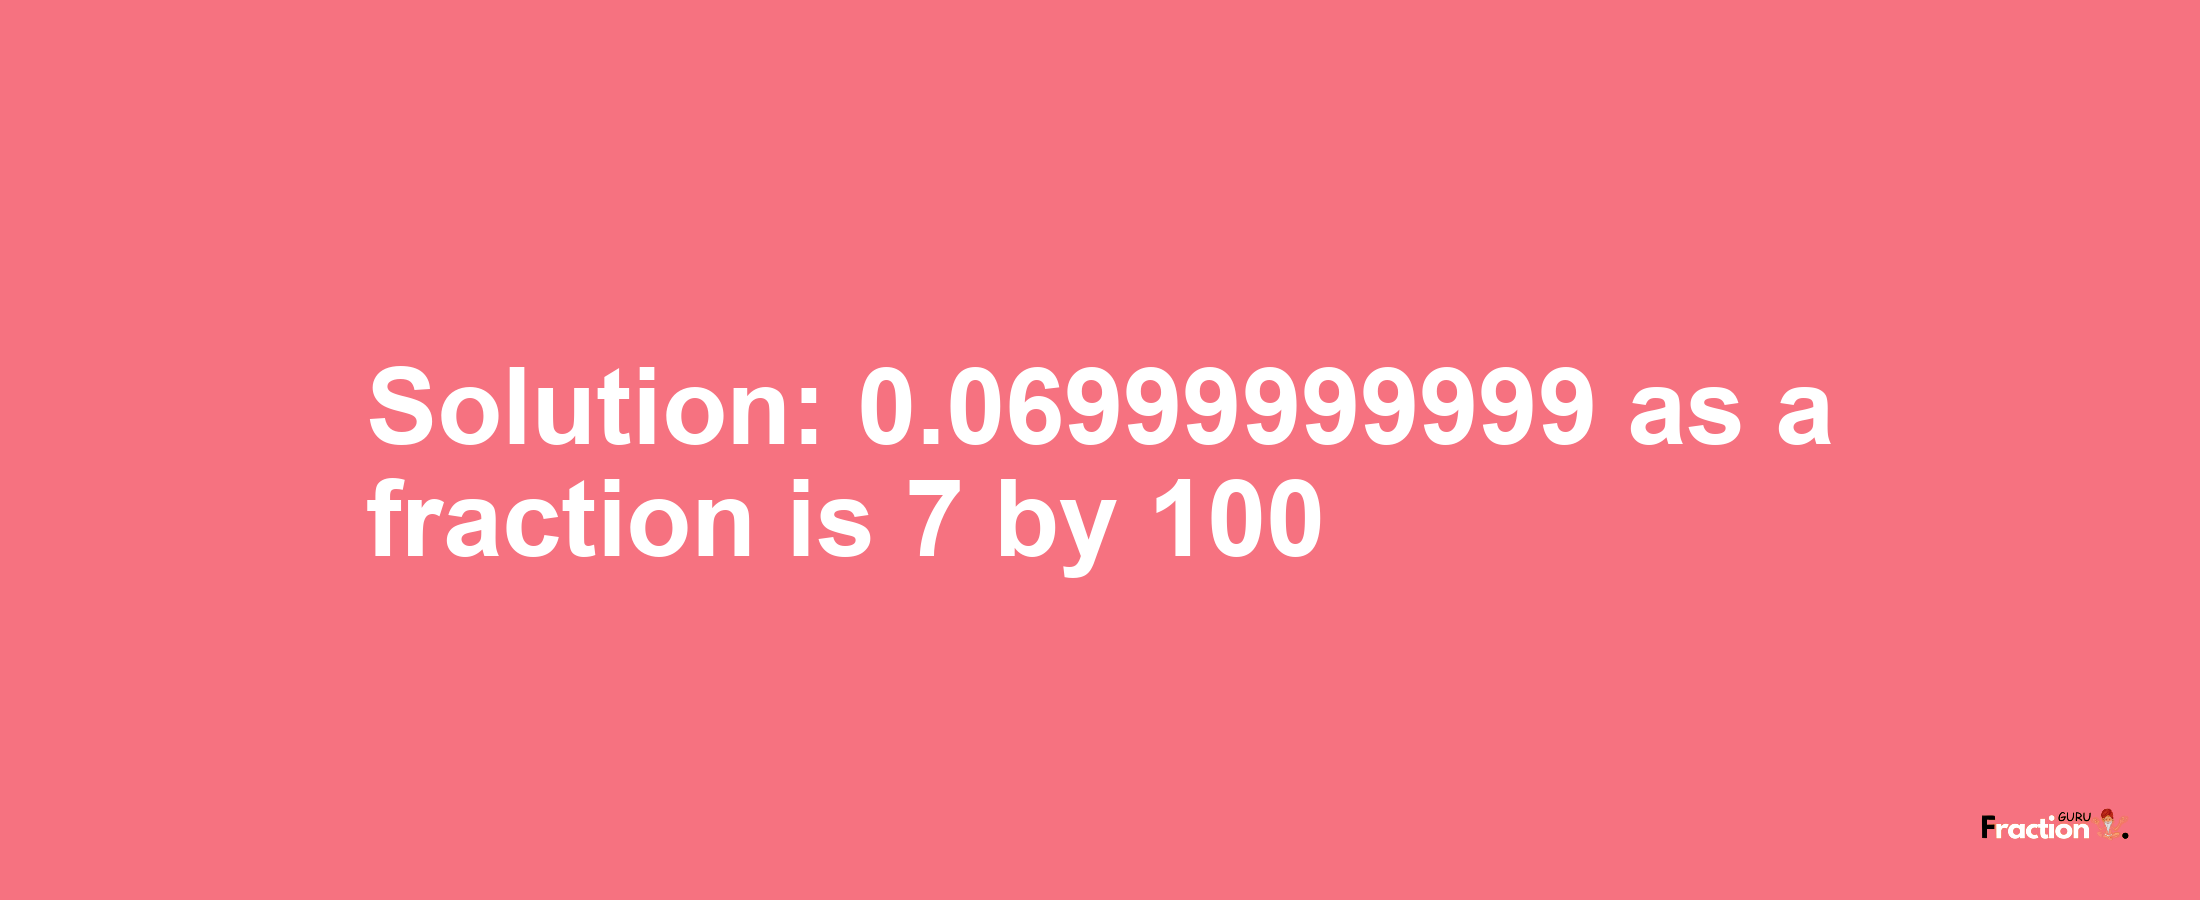 Solution:0.06999999999 as a fraction is 7/100